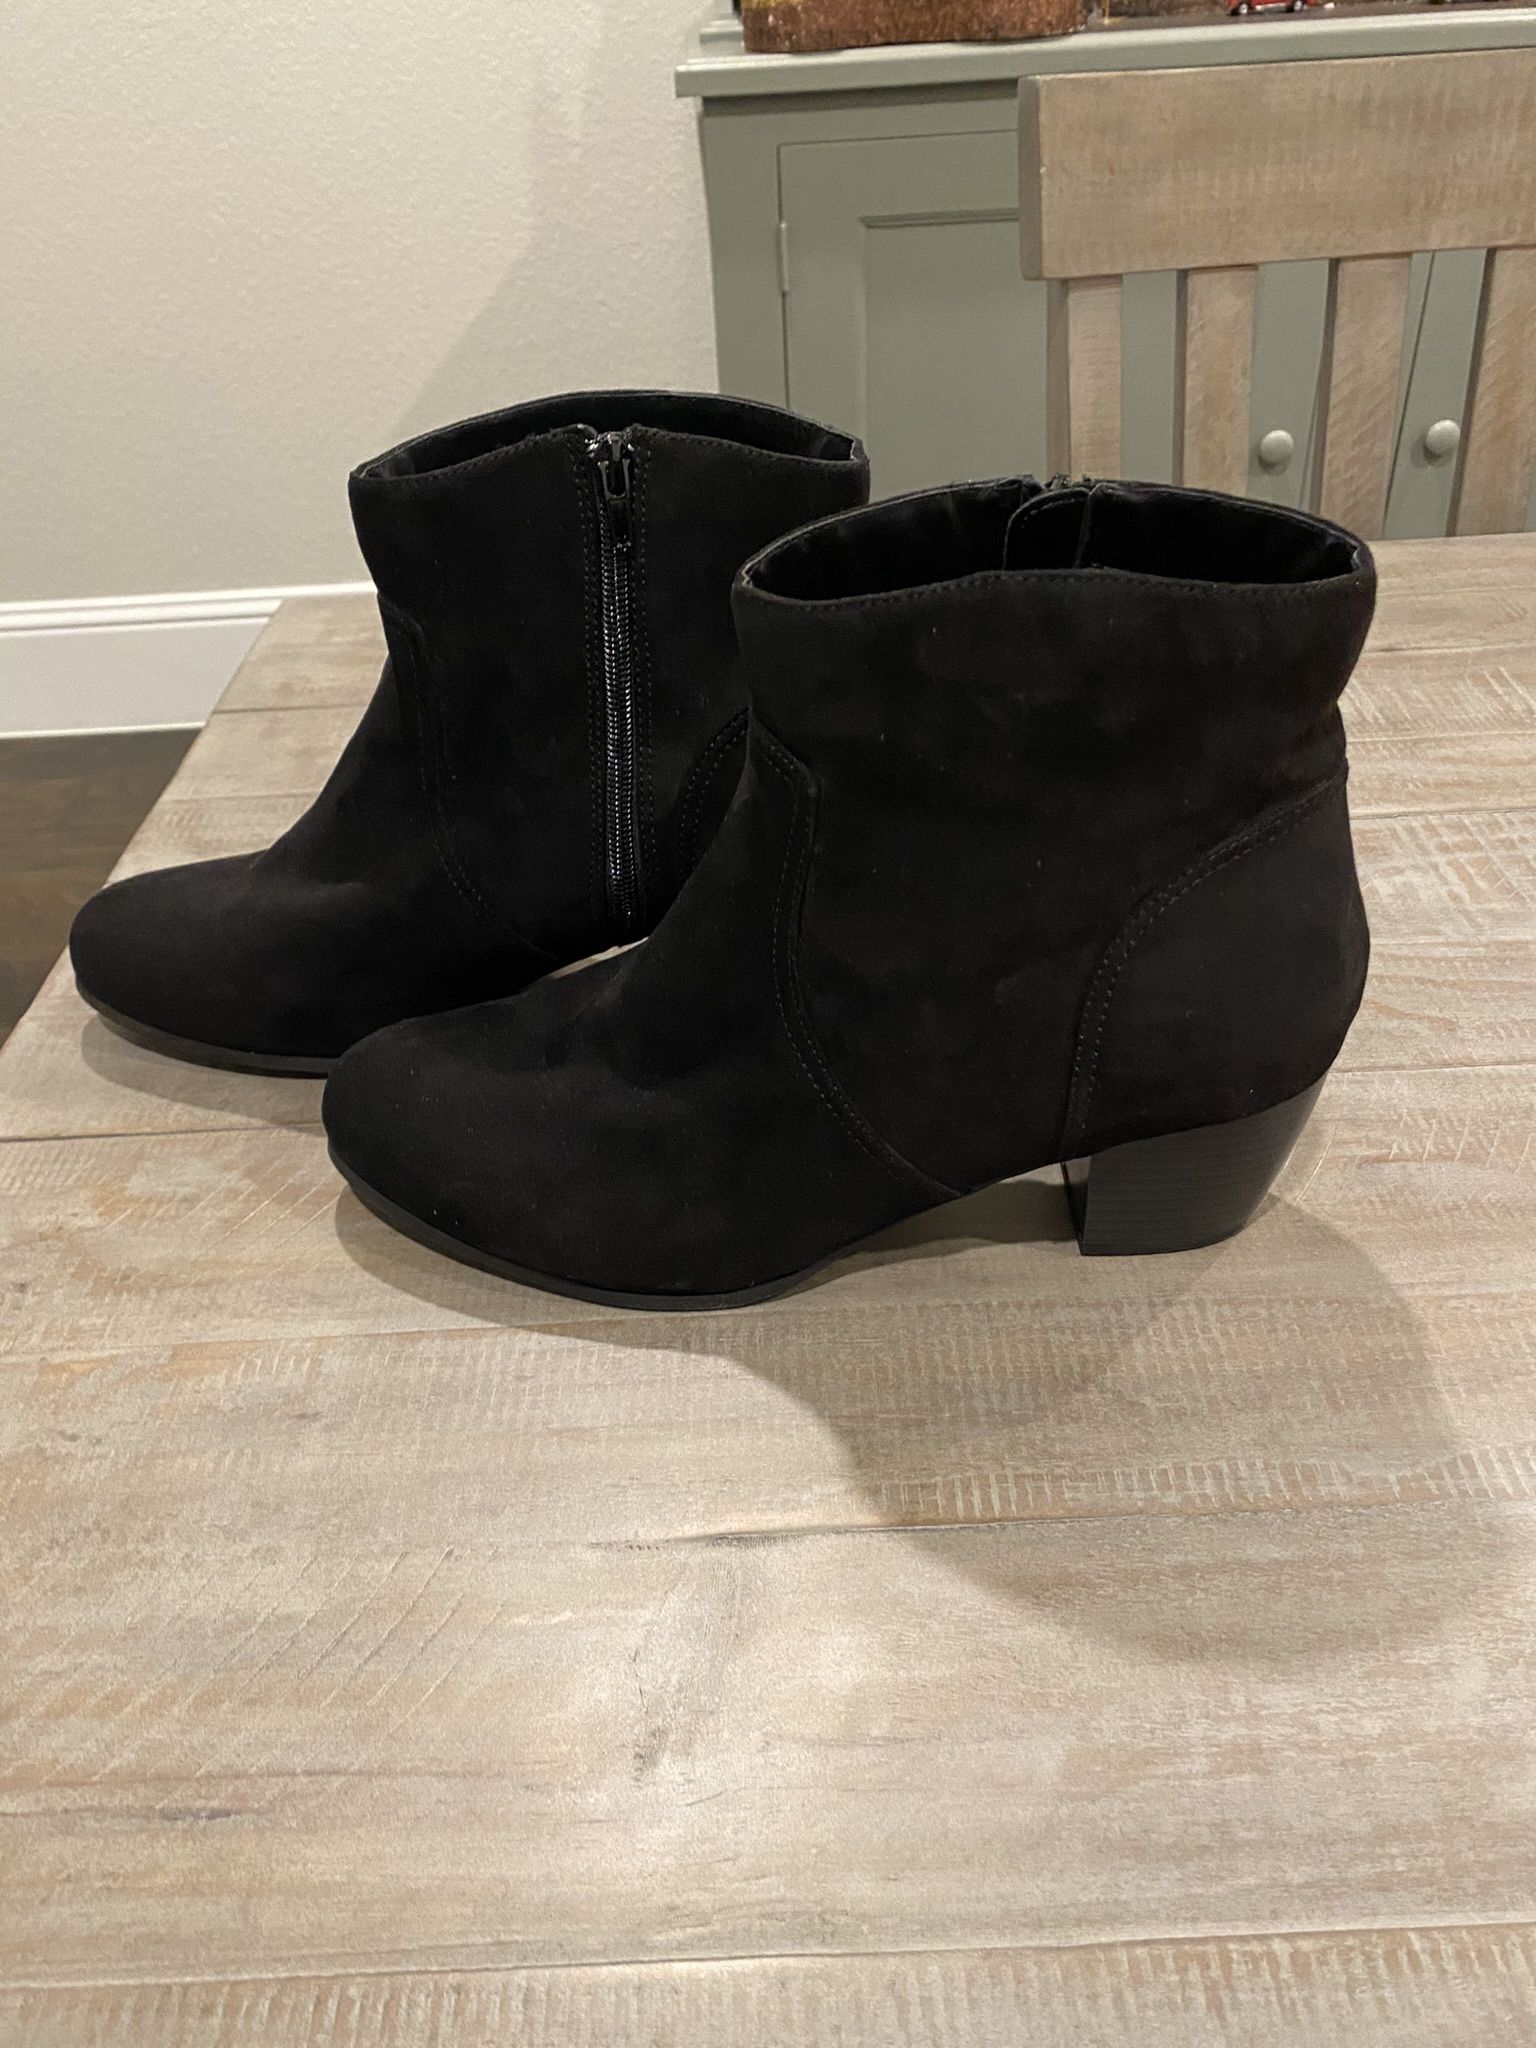 ANA Stacked Heel Booties - Size 11W